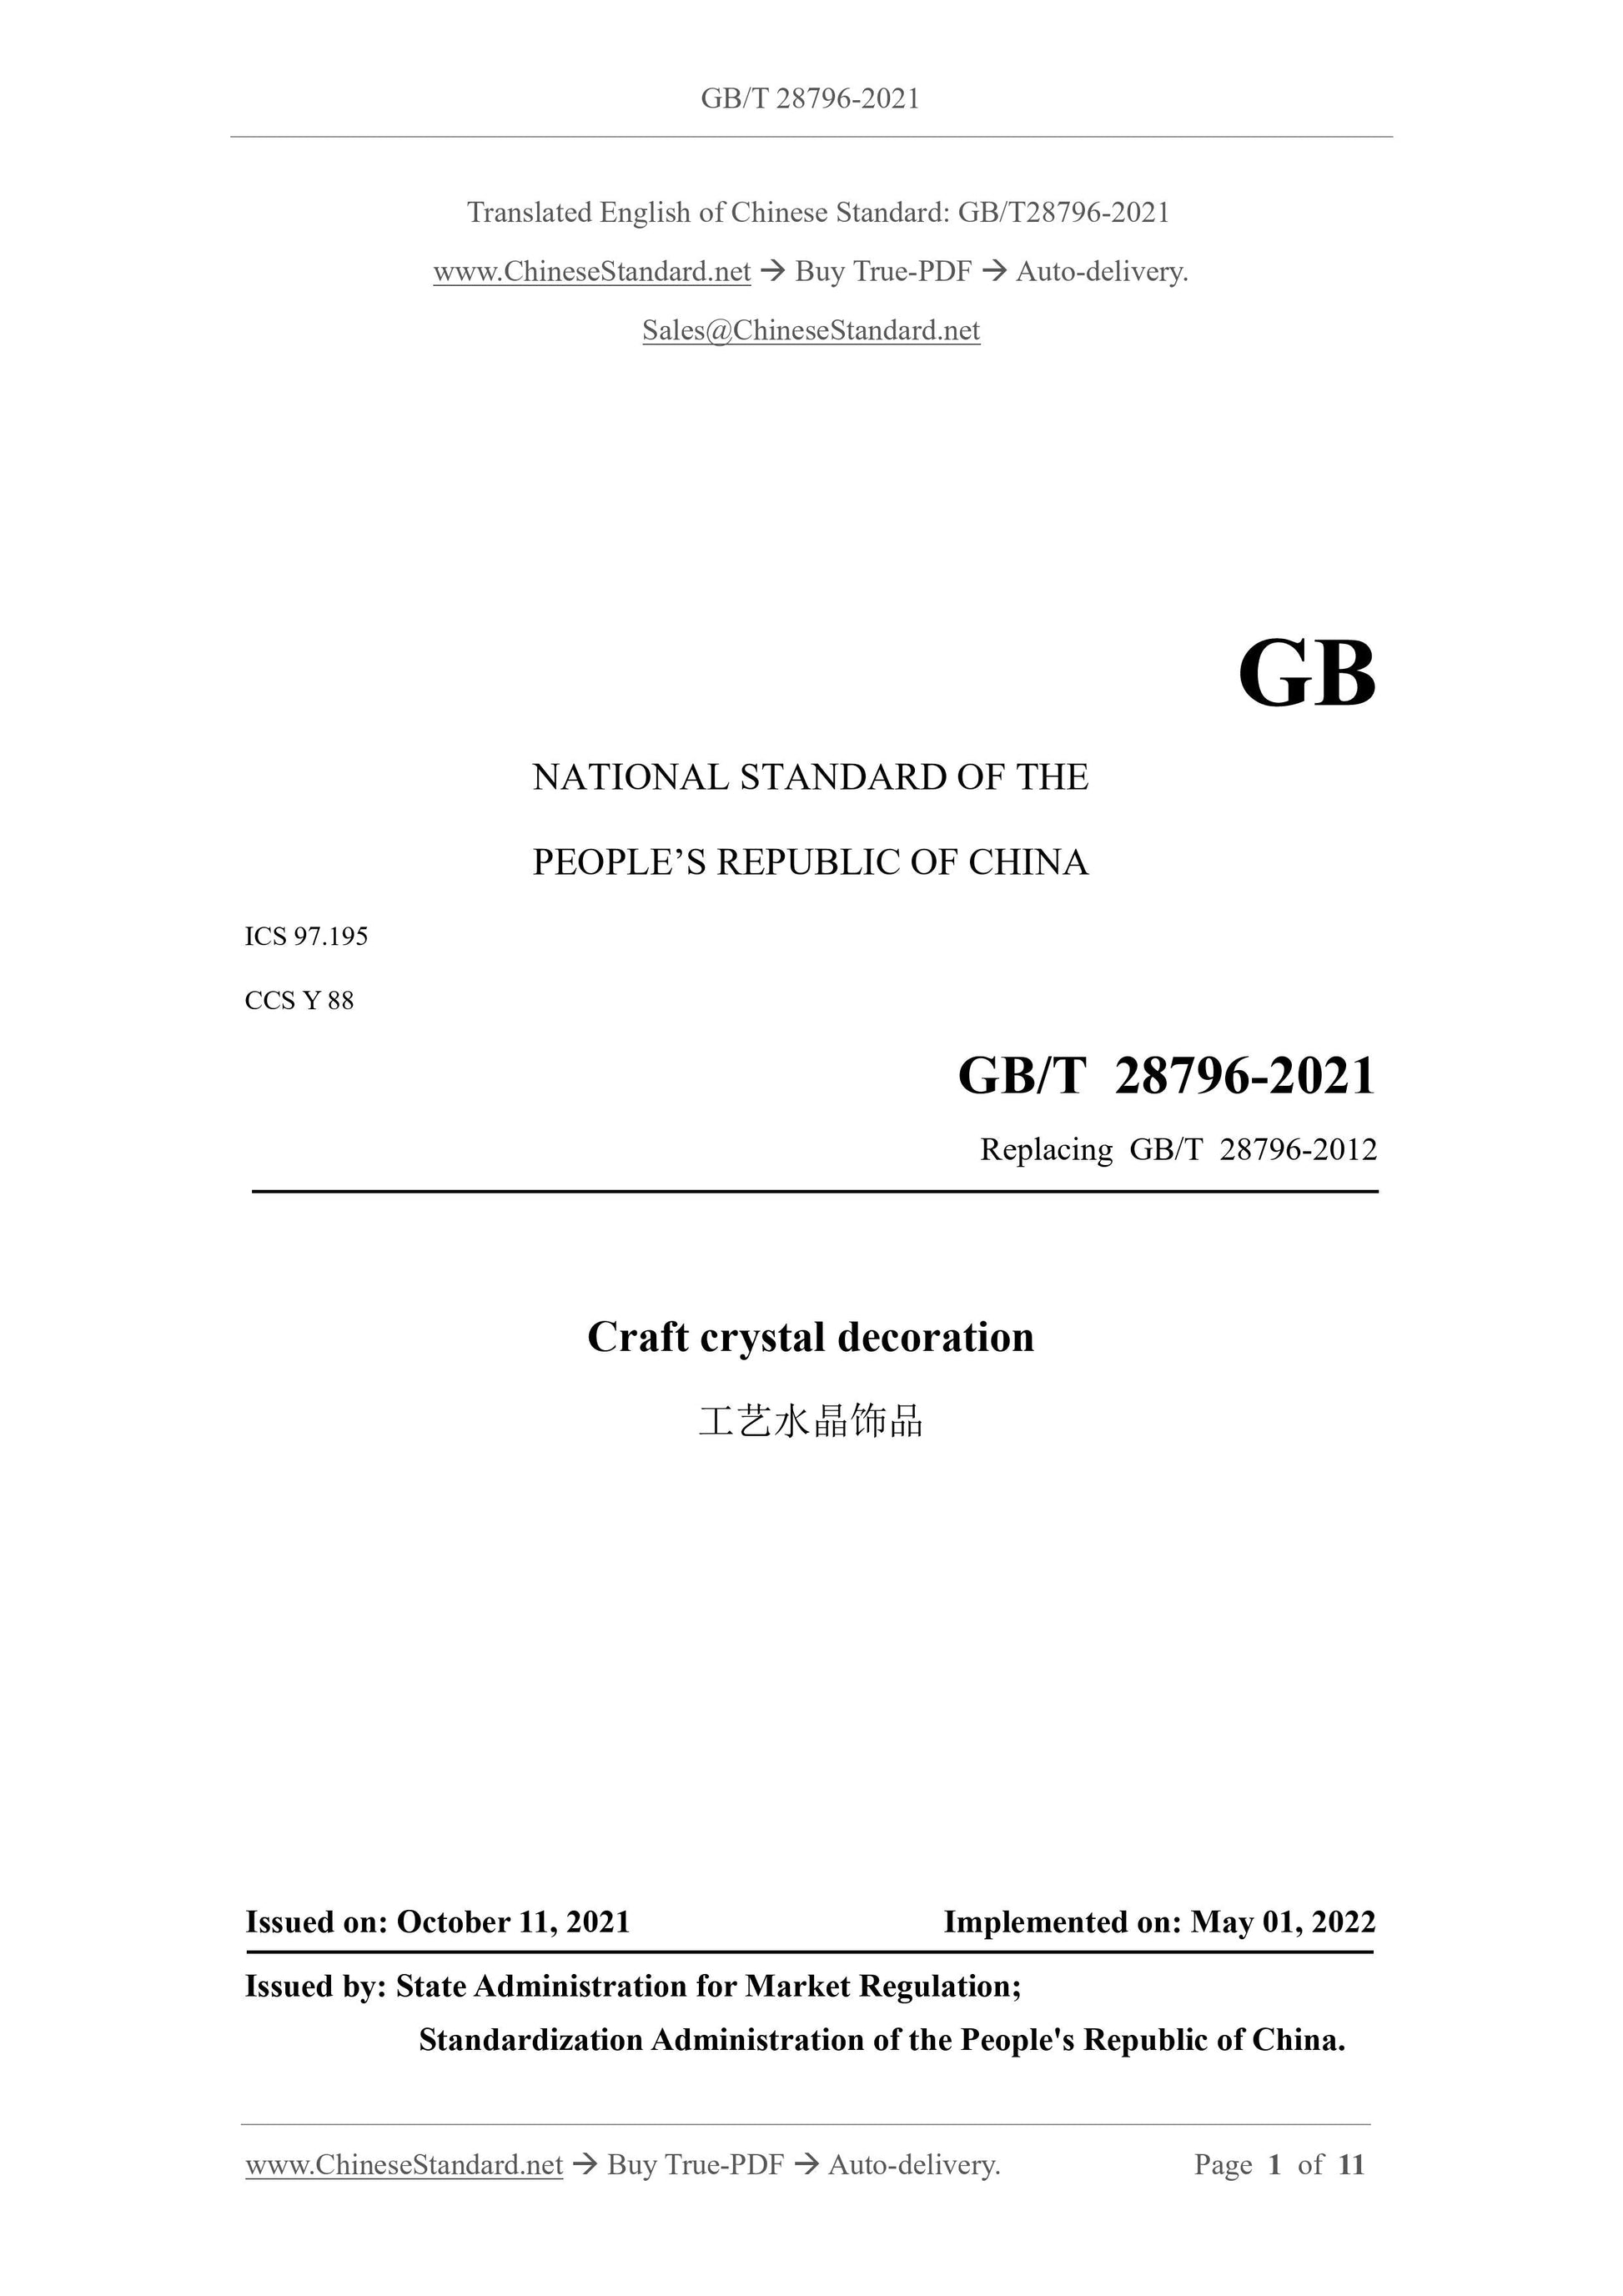 GB/T 28796-2021 Page 1